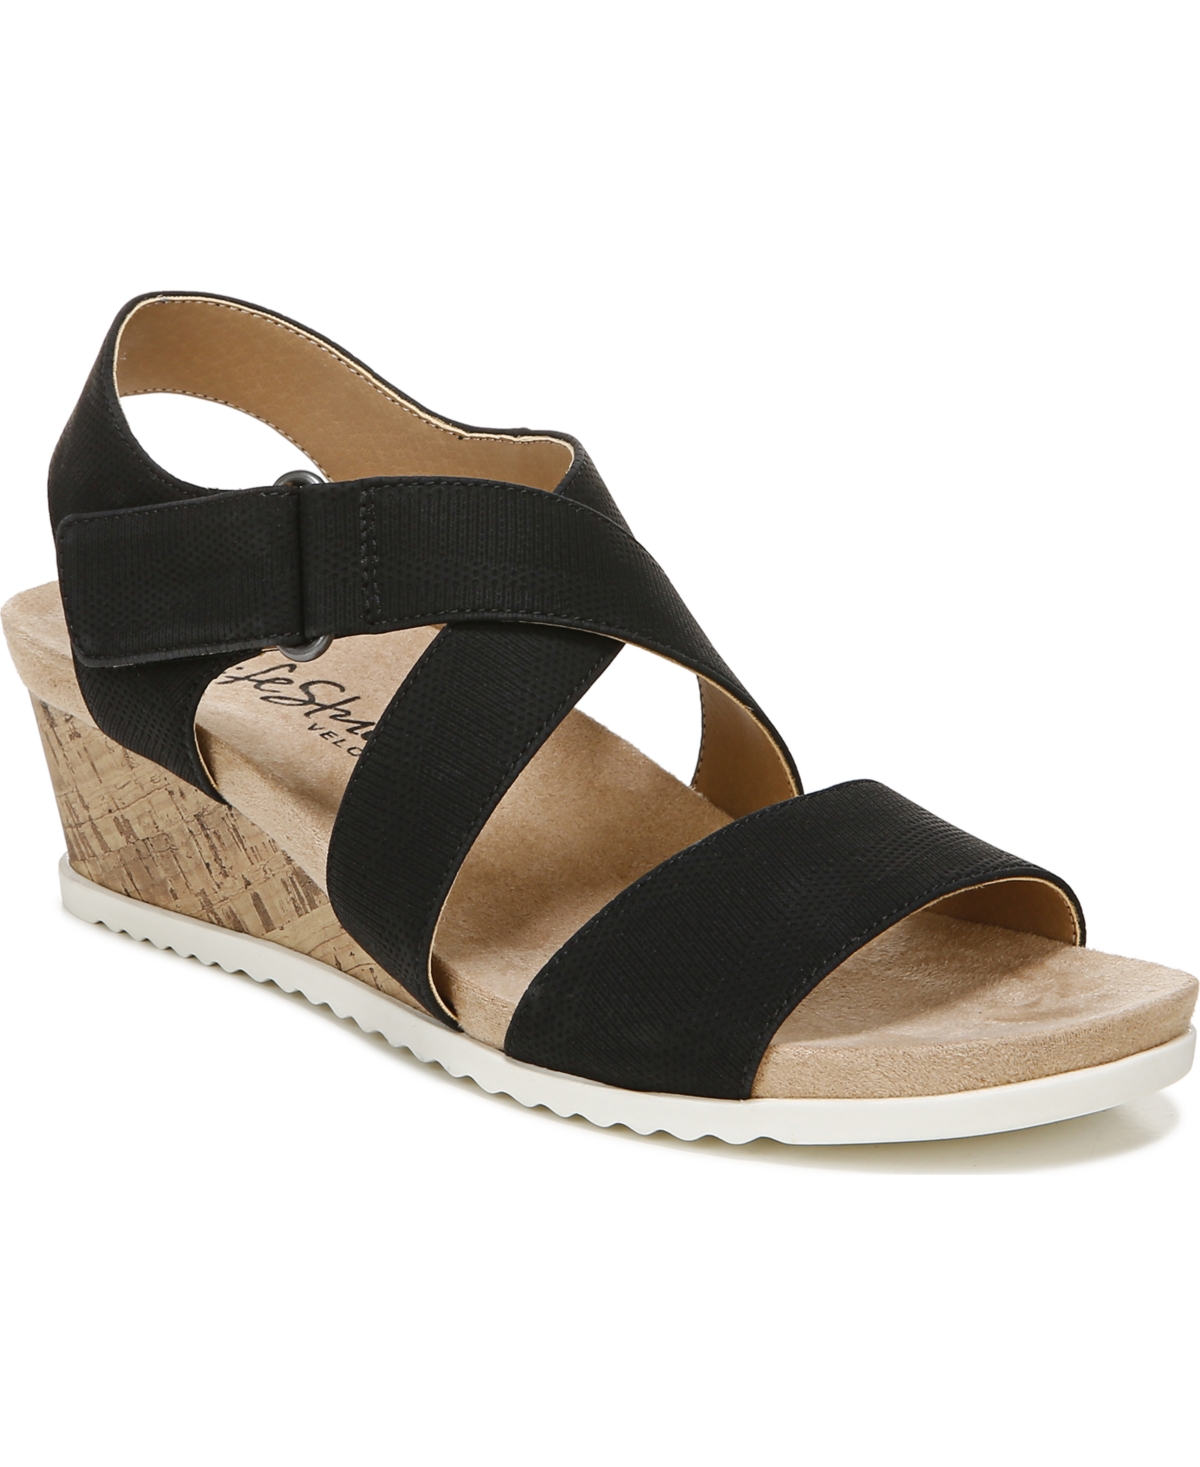 Sincere Strappy Wedge Sandals - Bone Faux Leather